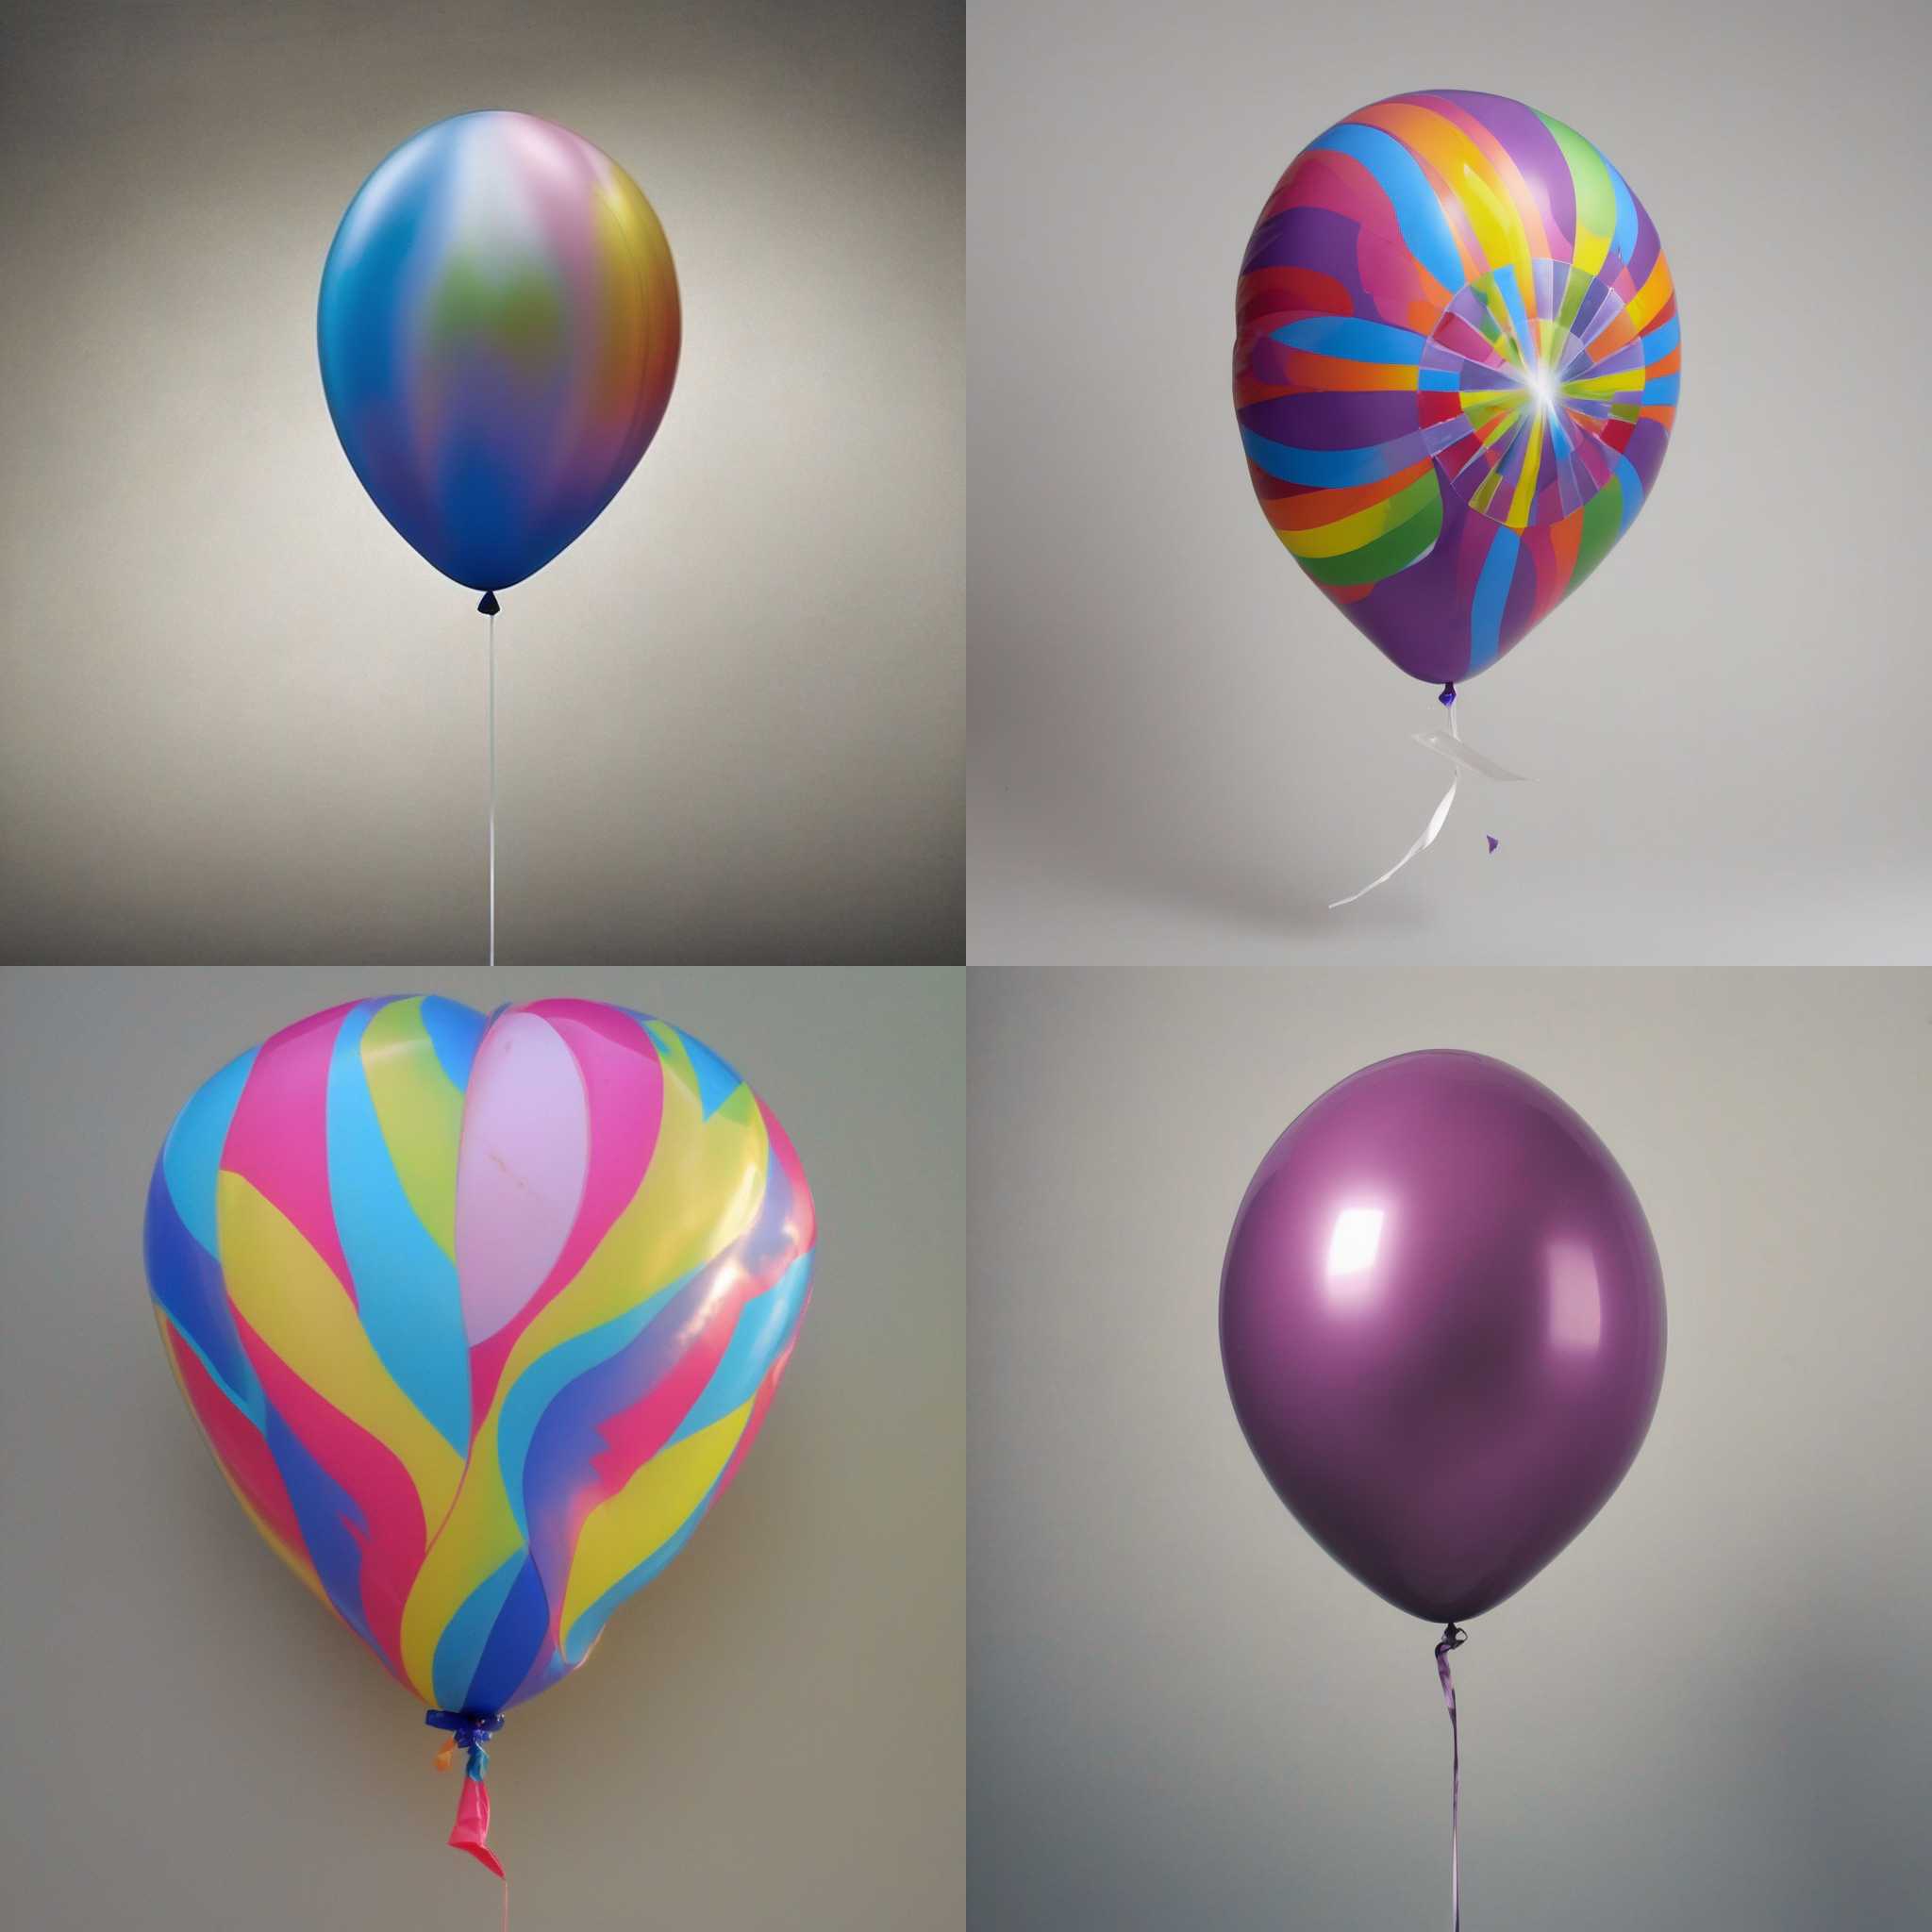 A punctured party balloon